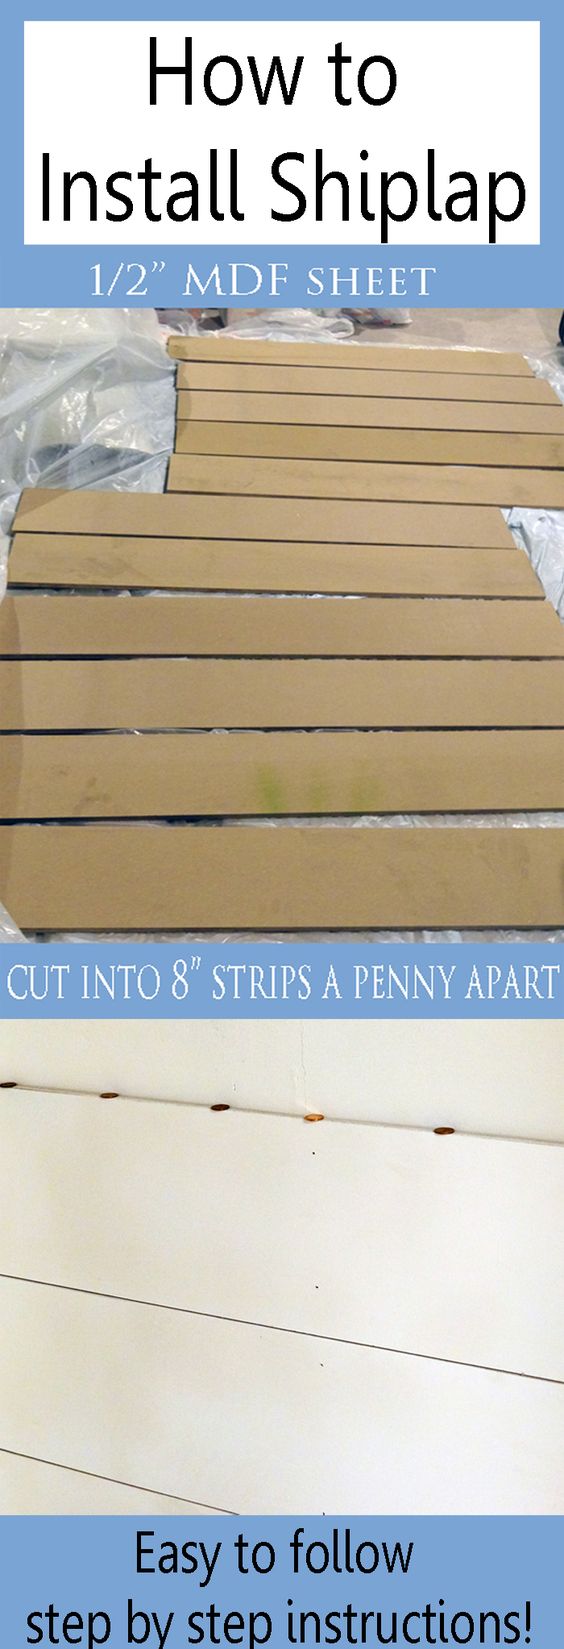 Shiplap is all the rage and is so easy and inexpensive to do! Come learn how to install shiplap with this step by step tutorial at Provident ?Home Design.